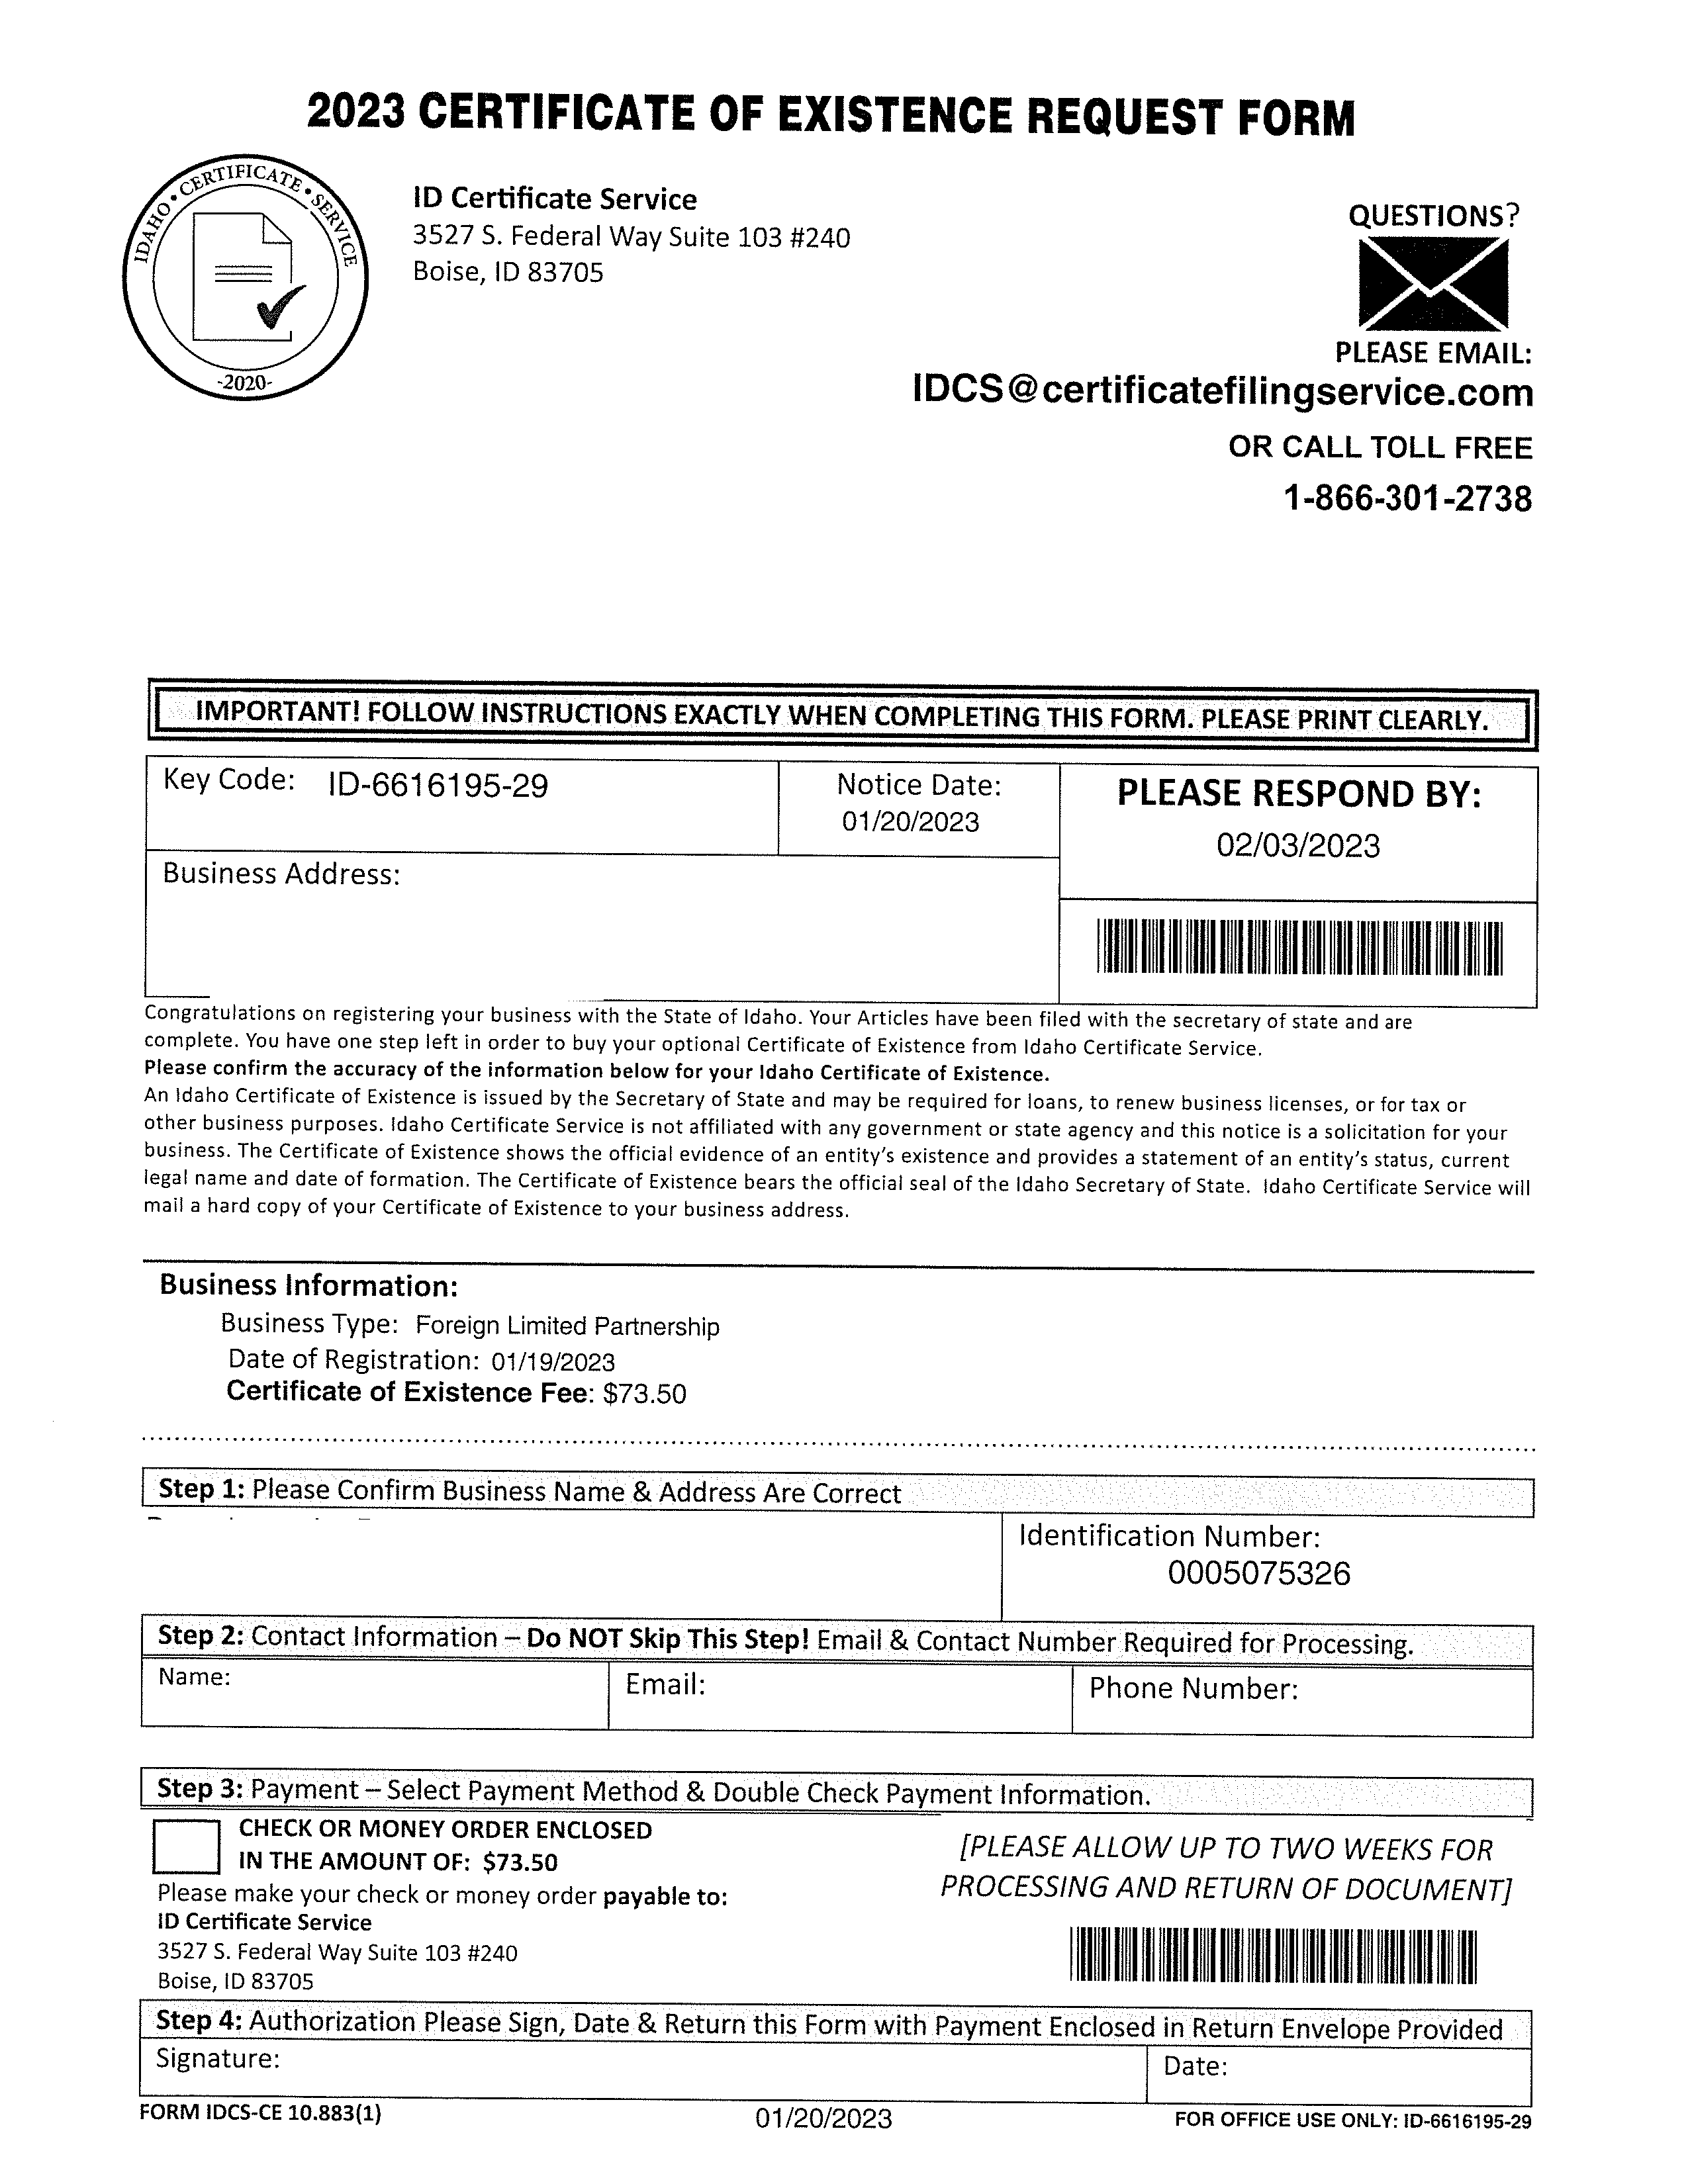 An example of a misleading business solicitation